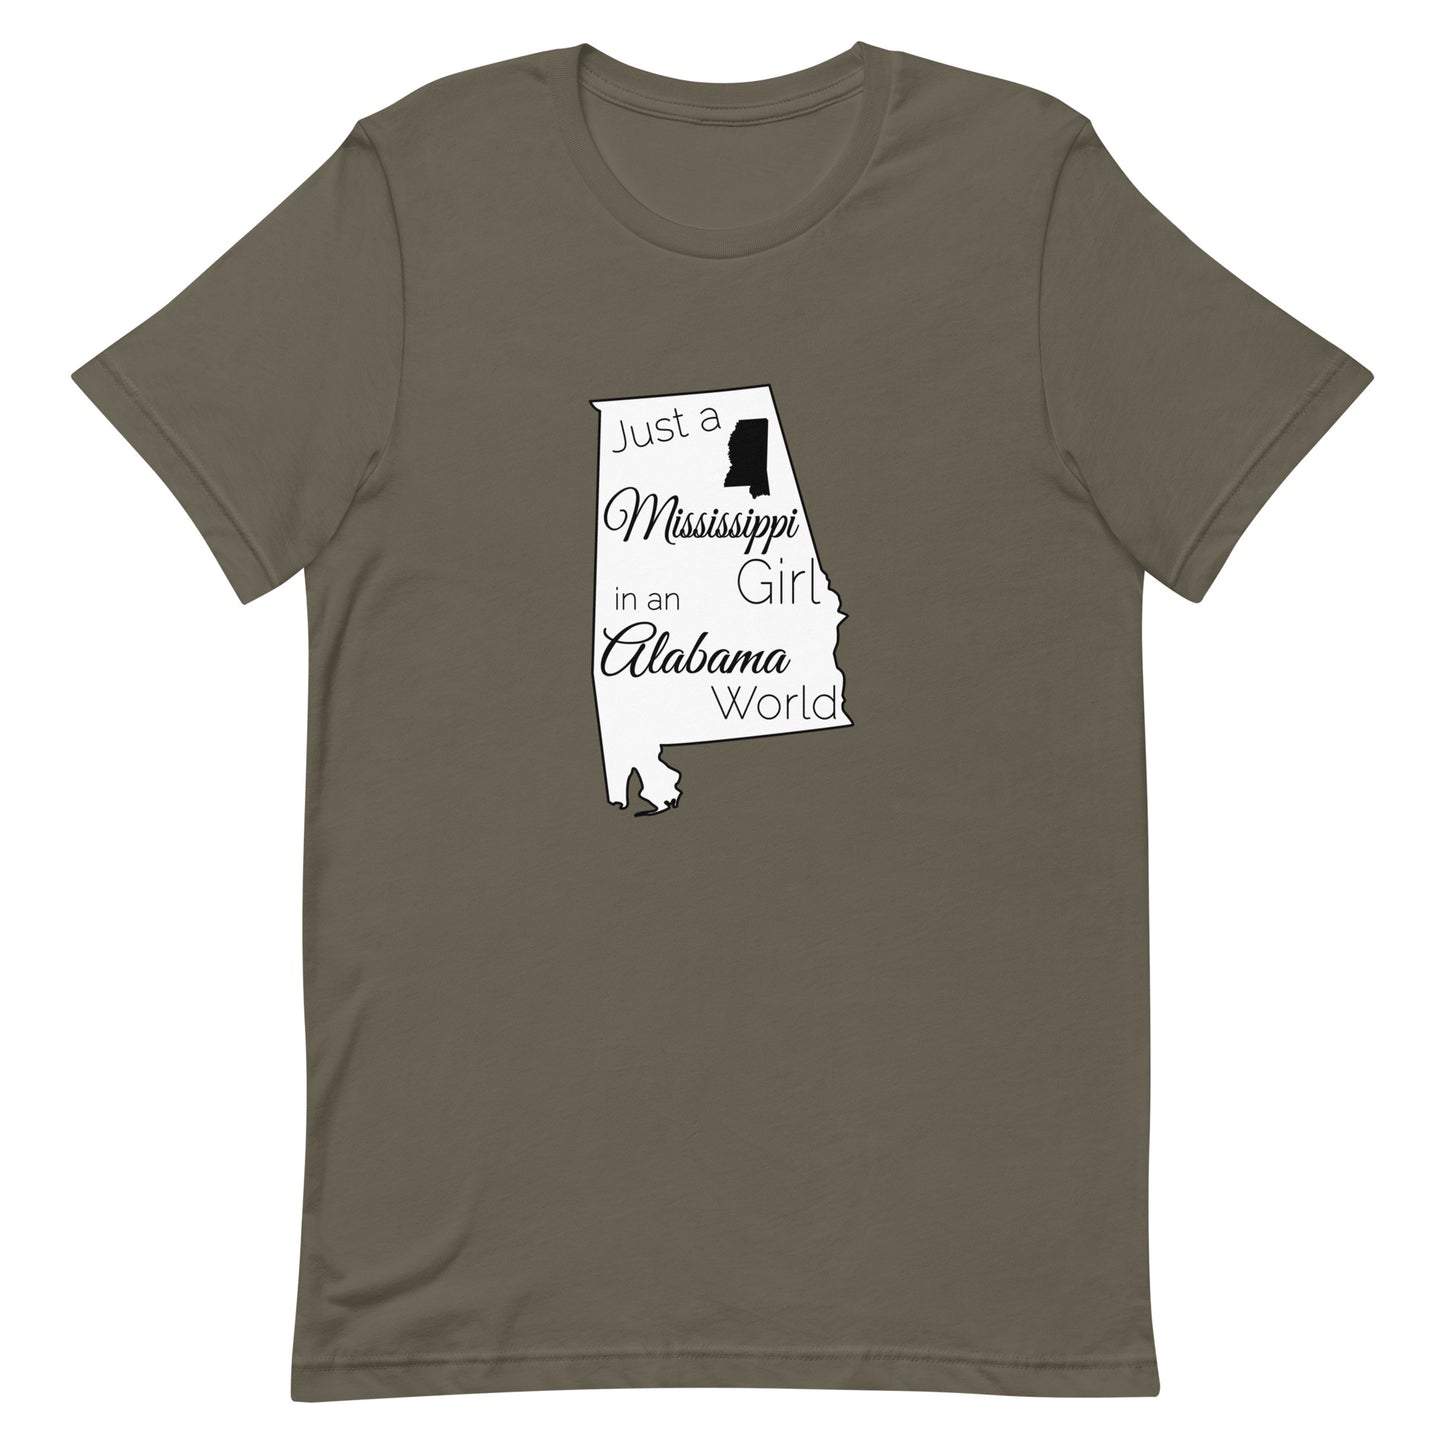 Just a Mississippi Girl in an Alabama World Unisex t-shirt